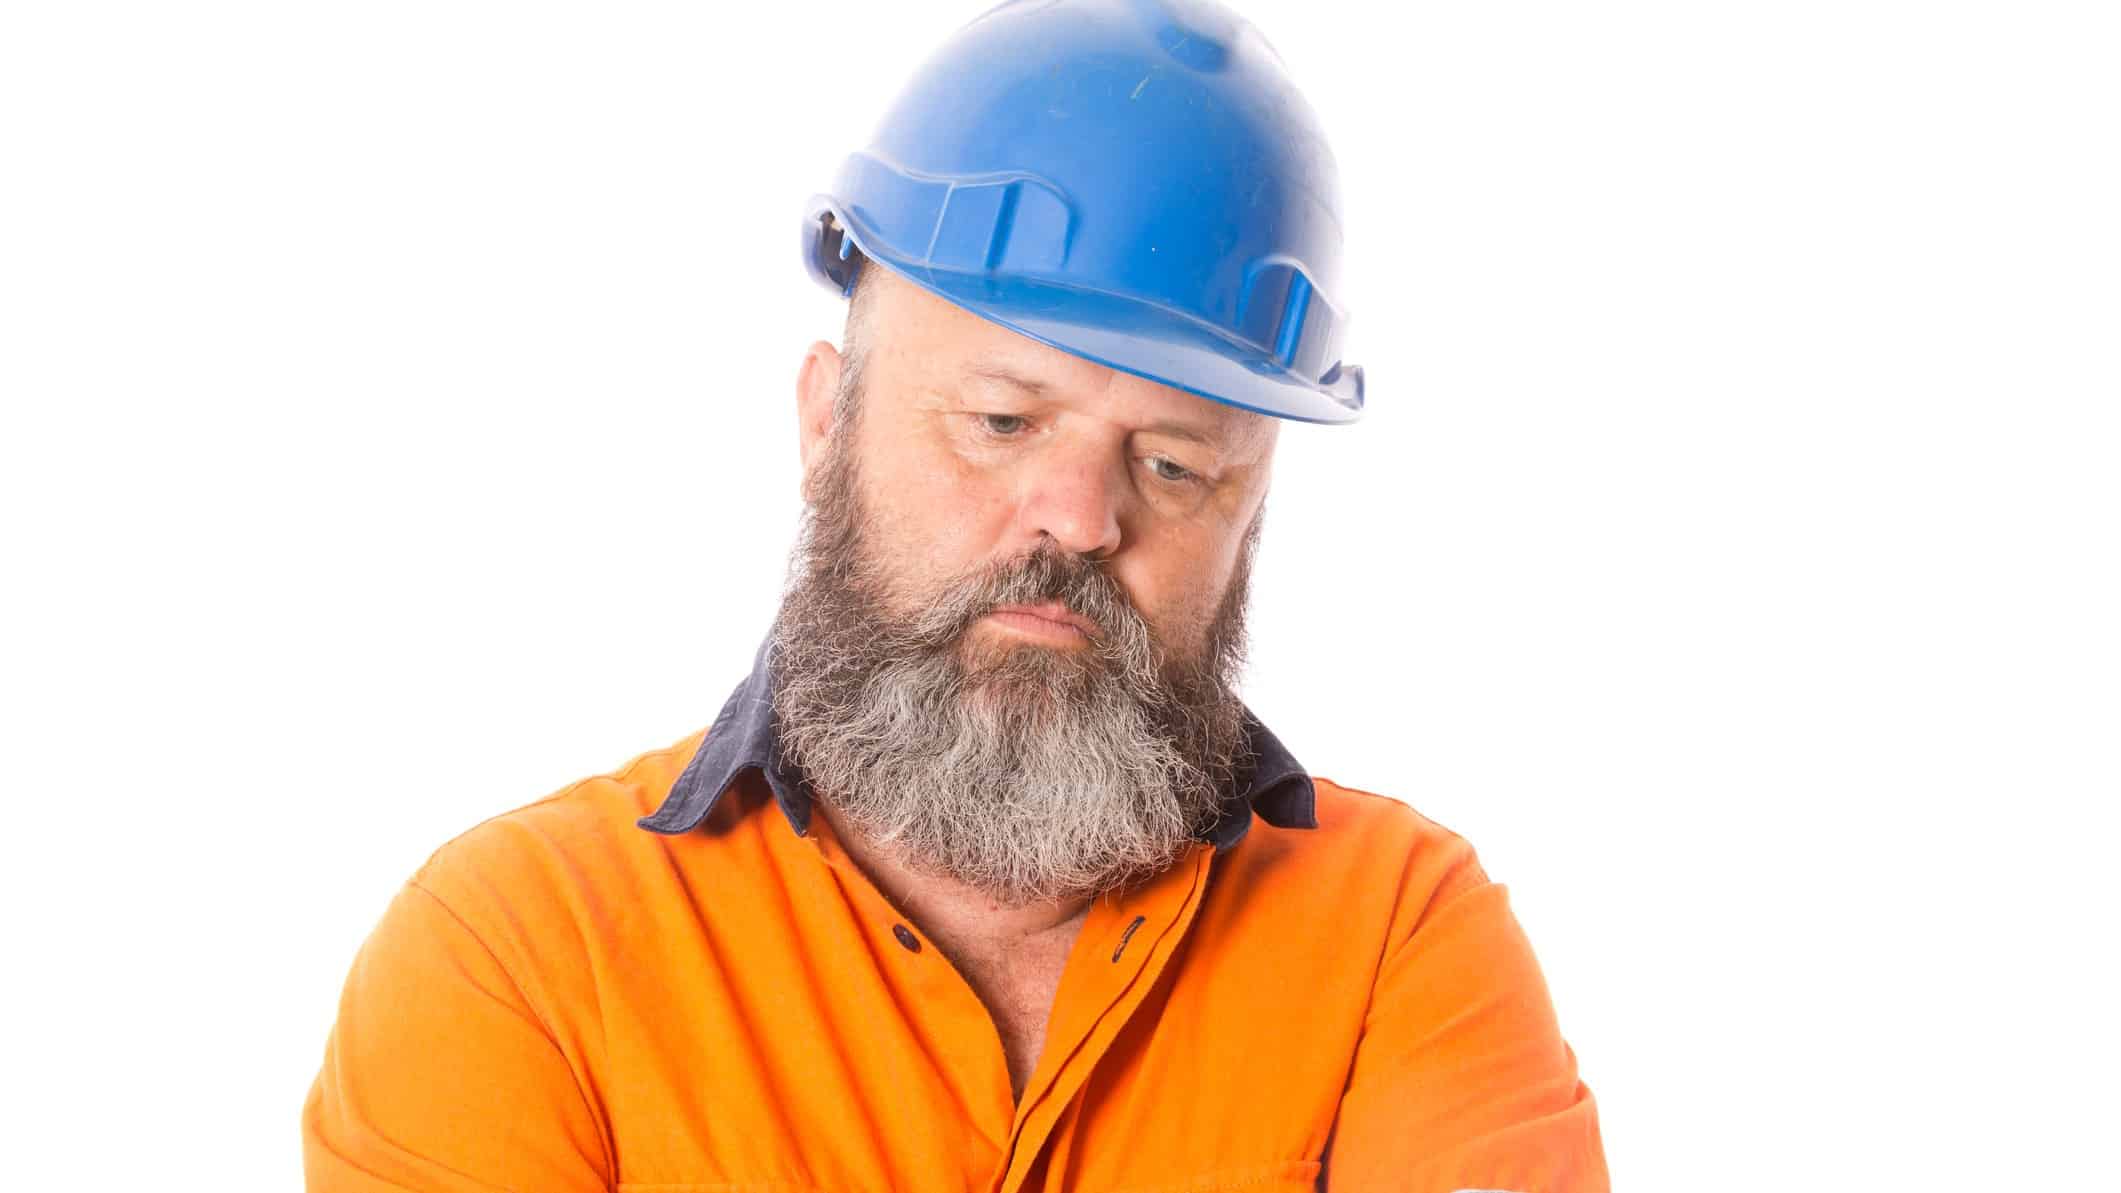 a man in high visibility shirt and hard hat with full beard looks downcast with eyes lowered as though he is disappointed or sad.